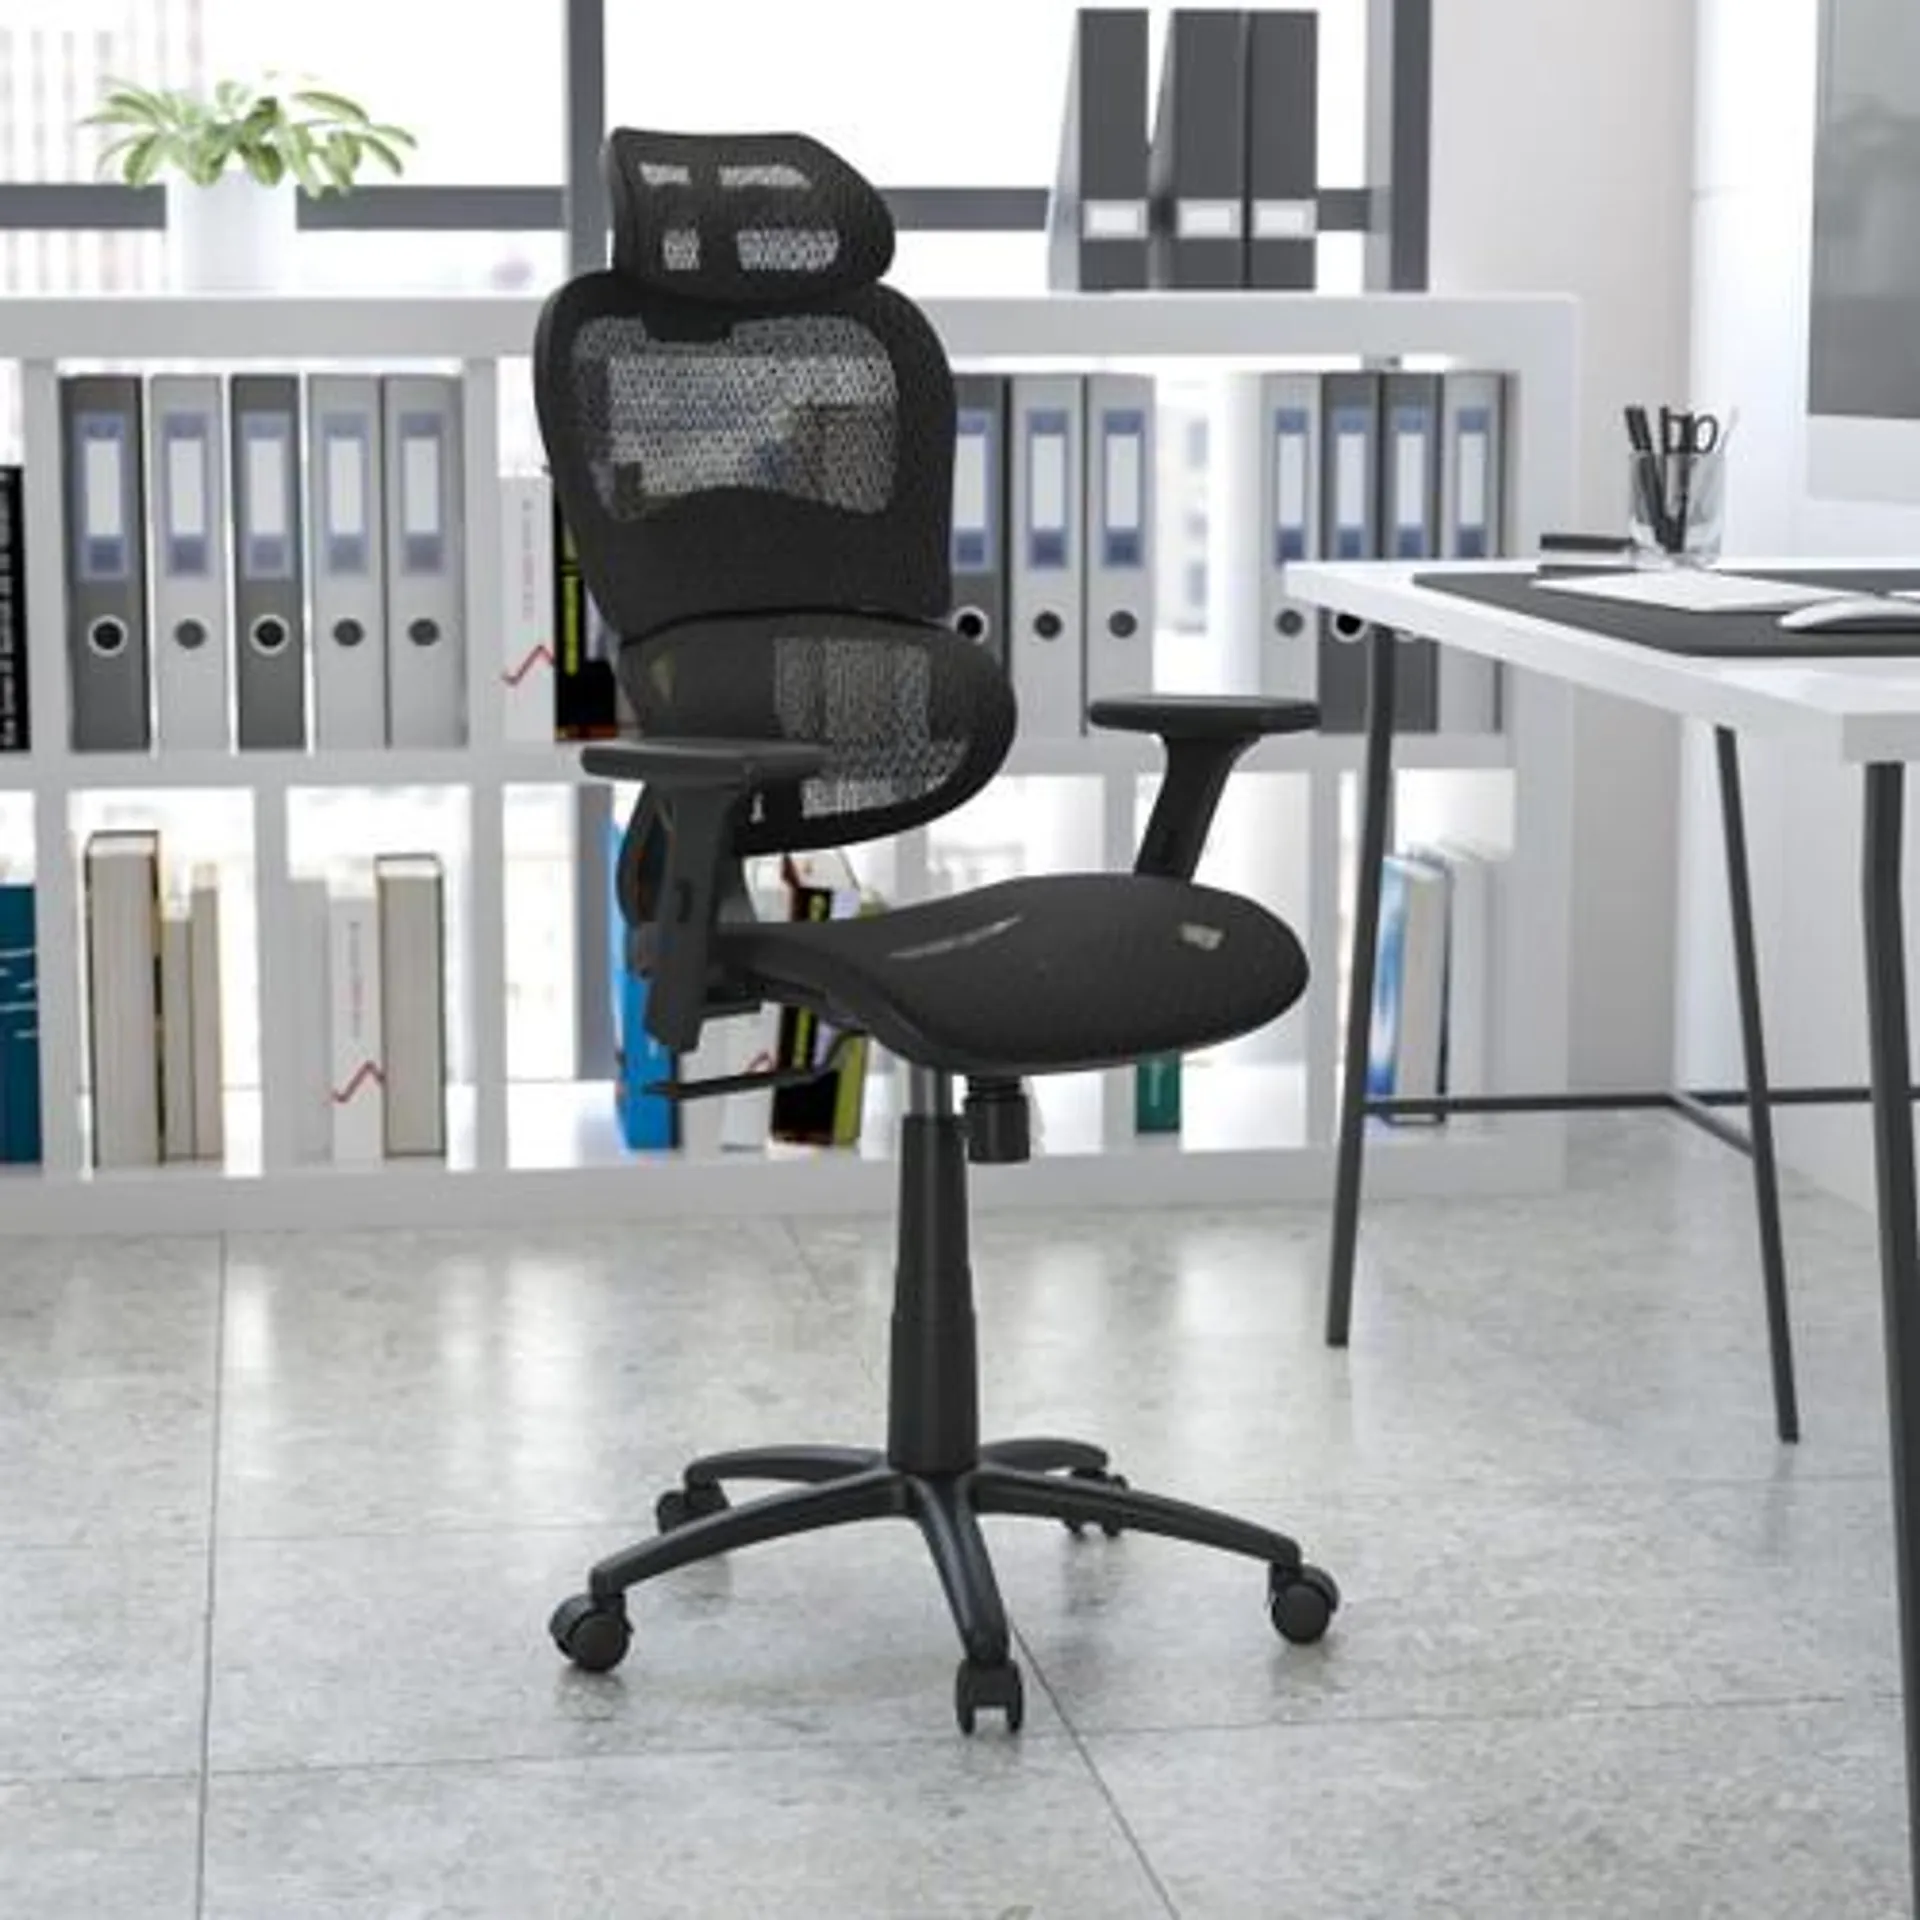 Ergonomic Mesh Office Chair with 2-to-1 Synchro-Tilt, Adjustable Headrest, Lumbar Support, and Adjustable Pivot Arms in Black - HLC1388F1KBKGG